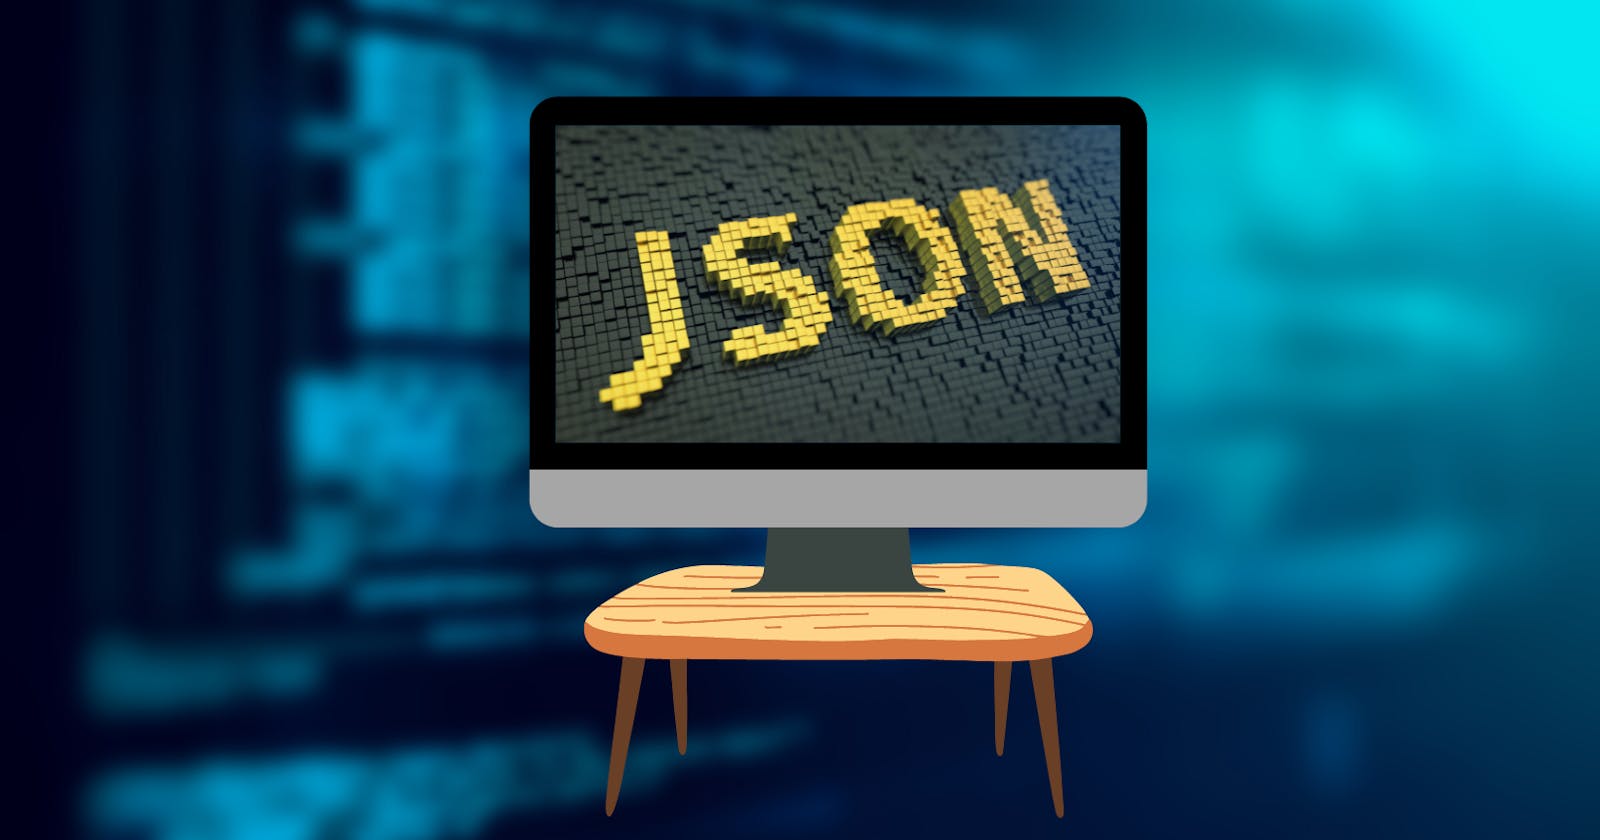 Learn JSON from head to toe